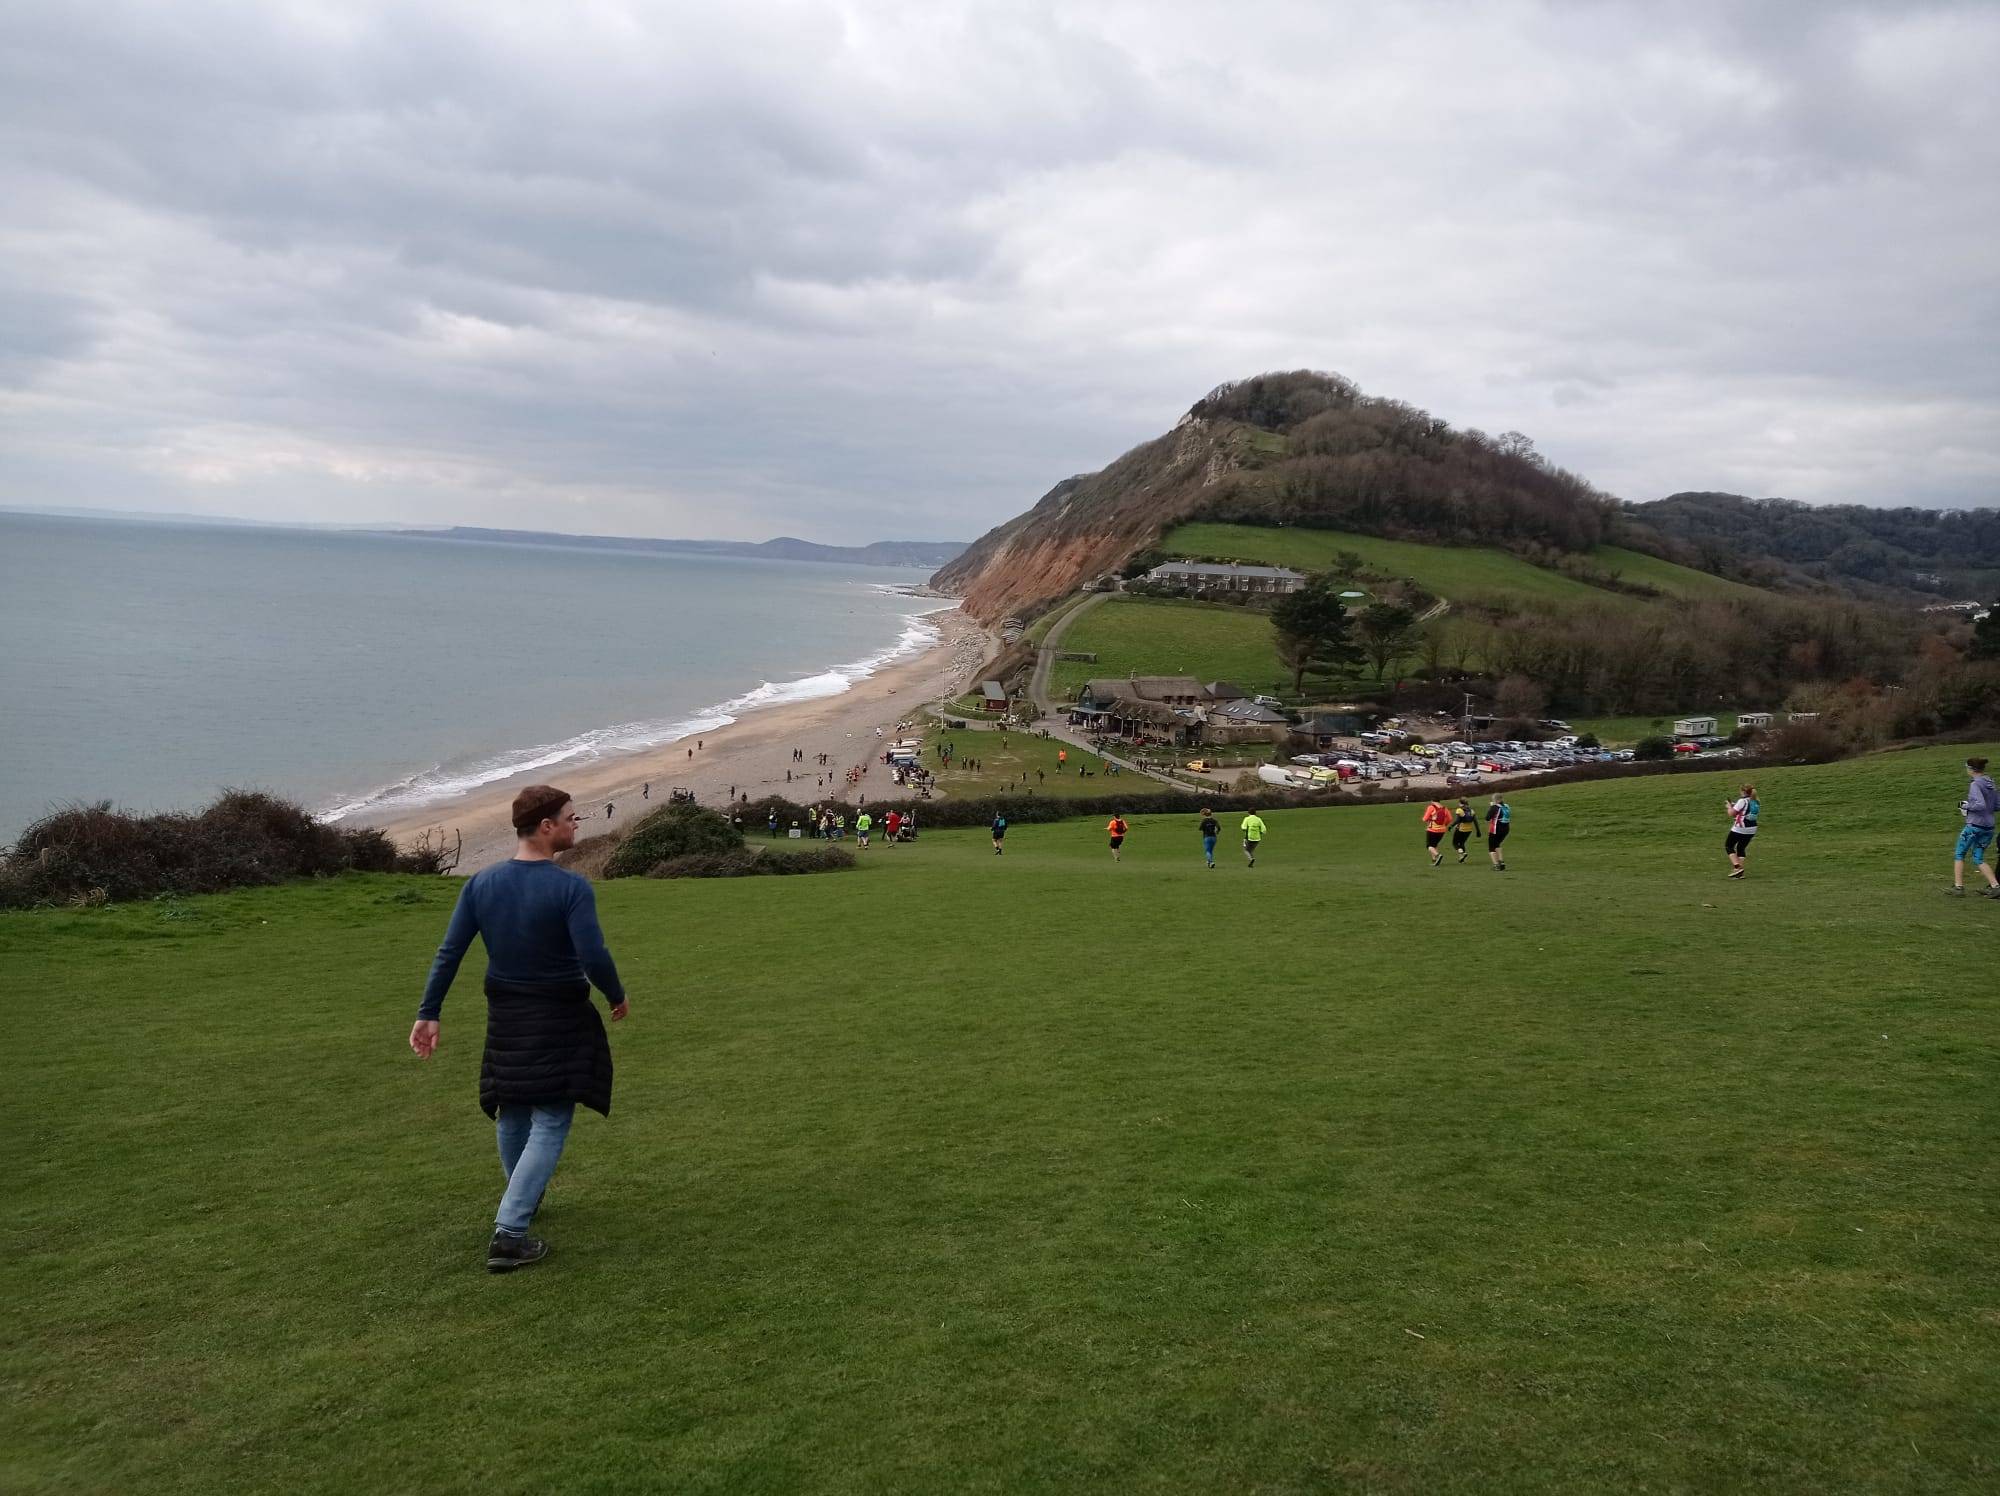 Me walking down the hill towards Branscombe… and some runners too!